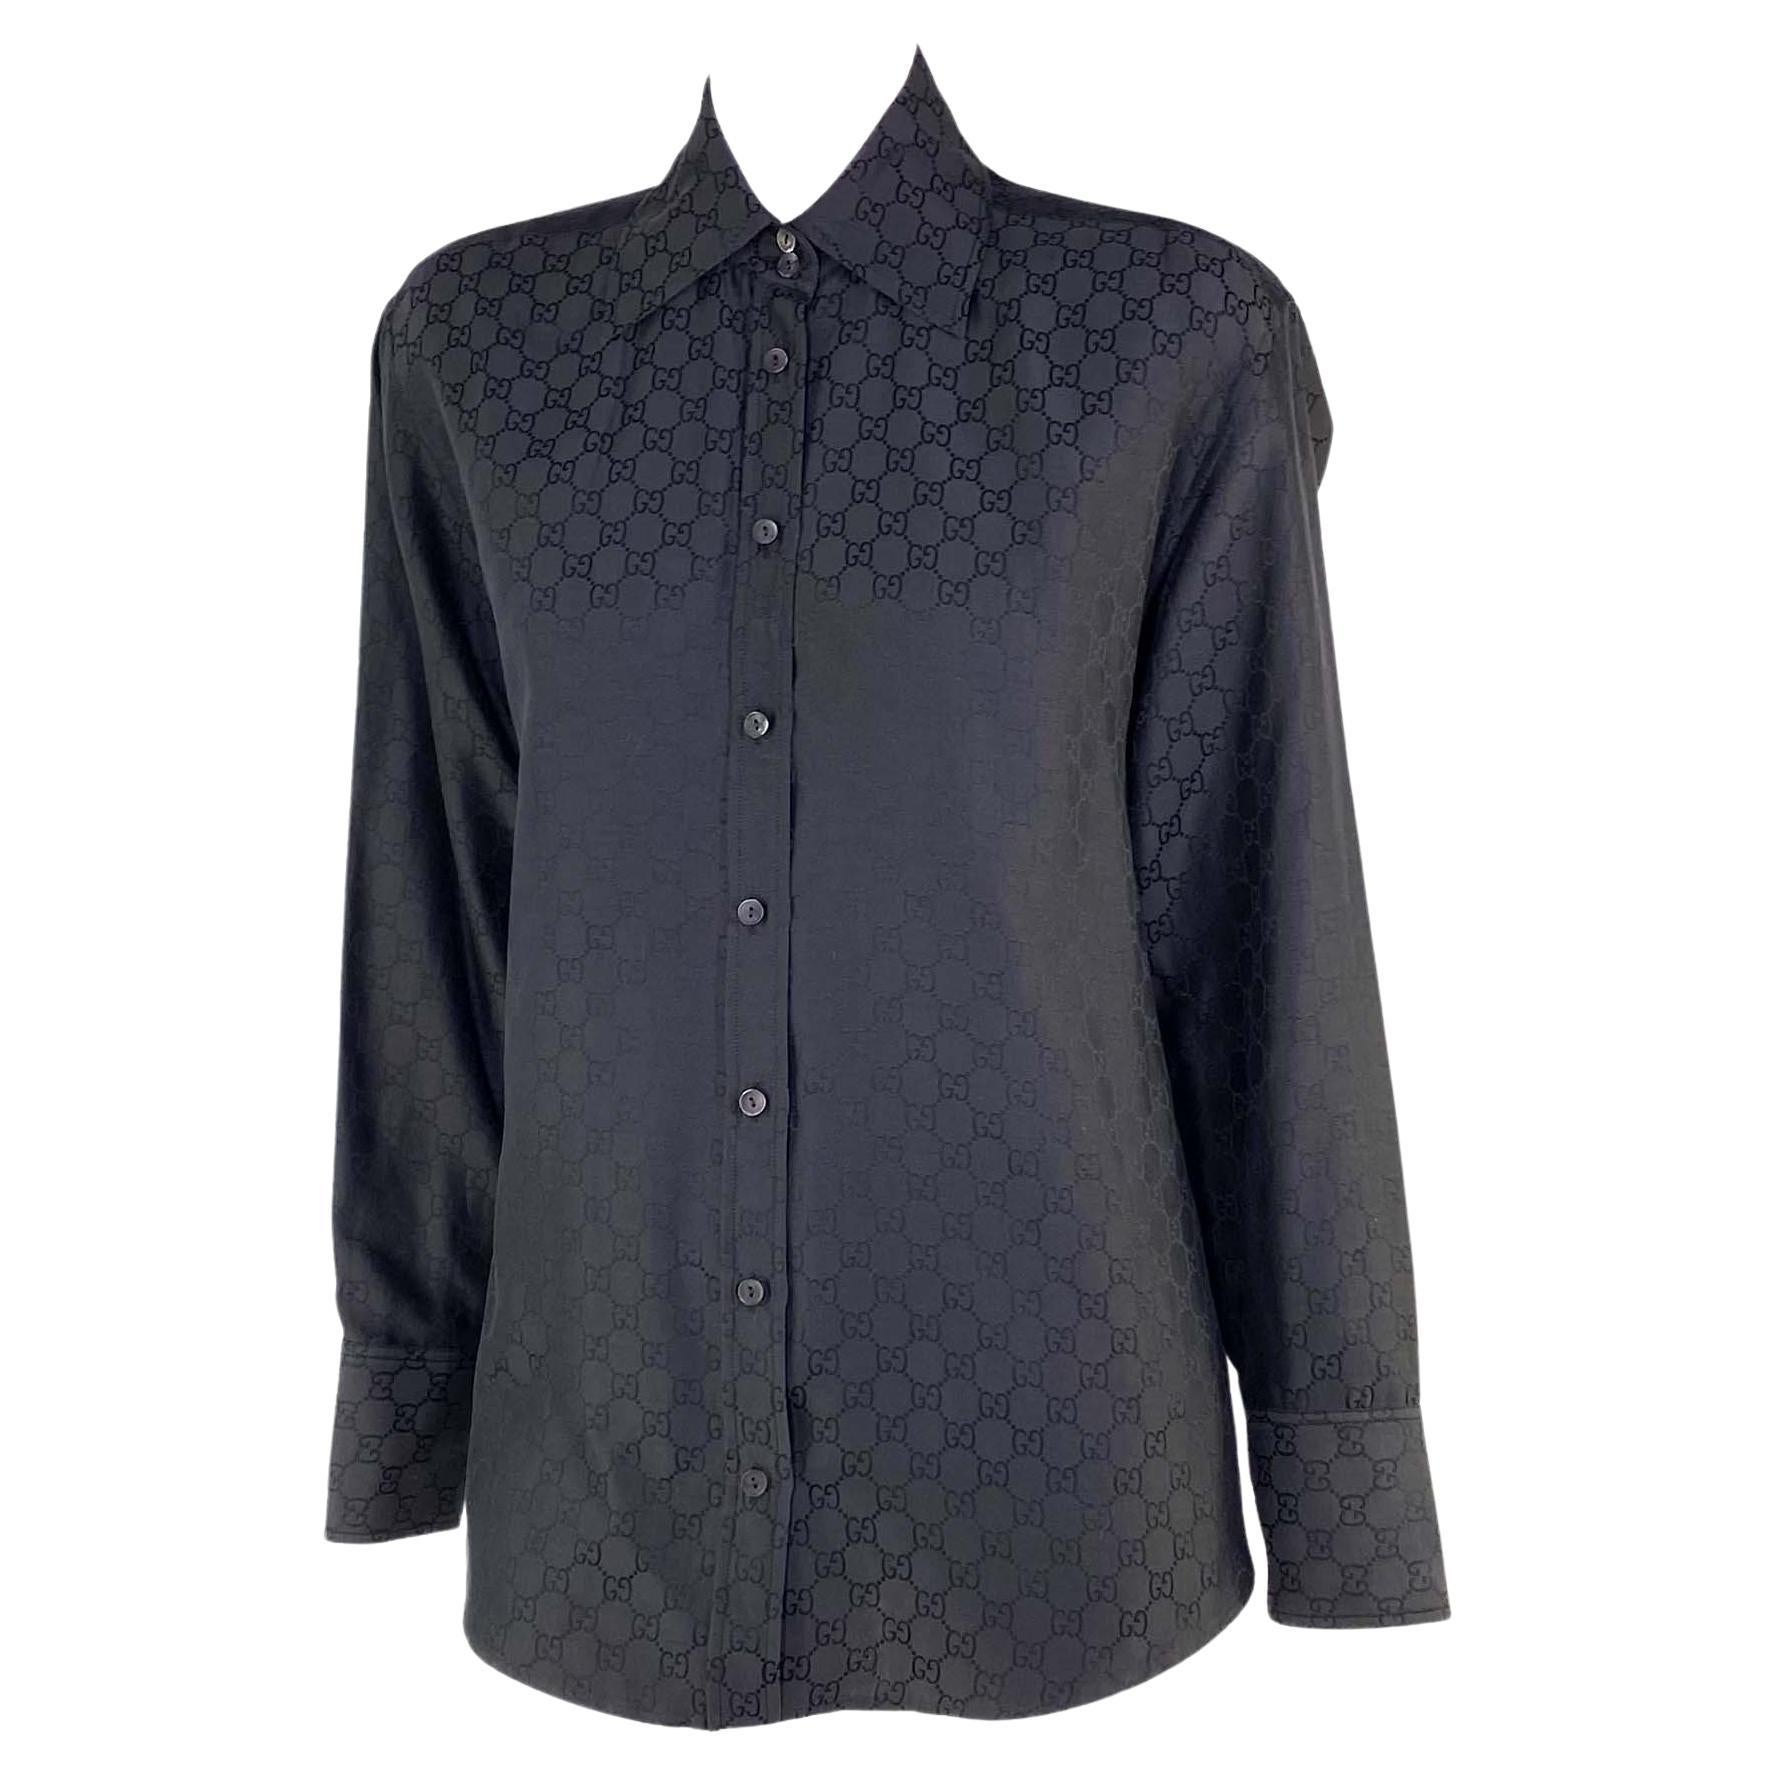 S/S 1998 Gucci by Tom Ford GG Monogram Black Cotton Silk Shoulder Pad Button Up